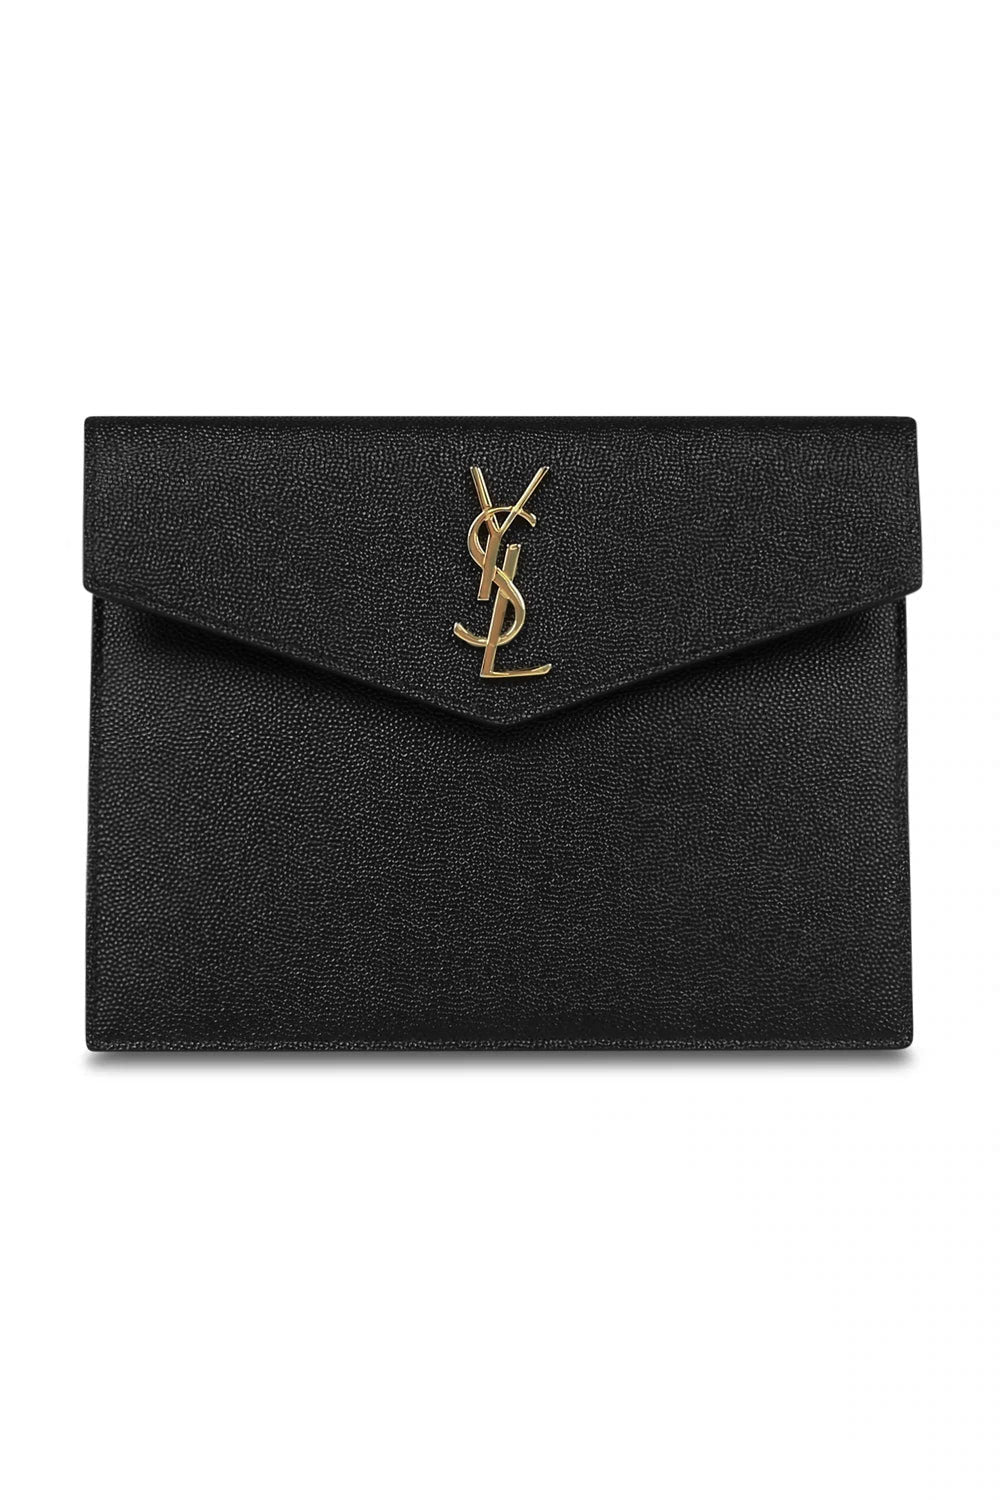 SAINT LAURENT SMALL LEATHER GOODS BLACK SMALL UPTOWN POUCH BLACK/GOLD